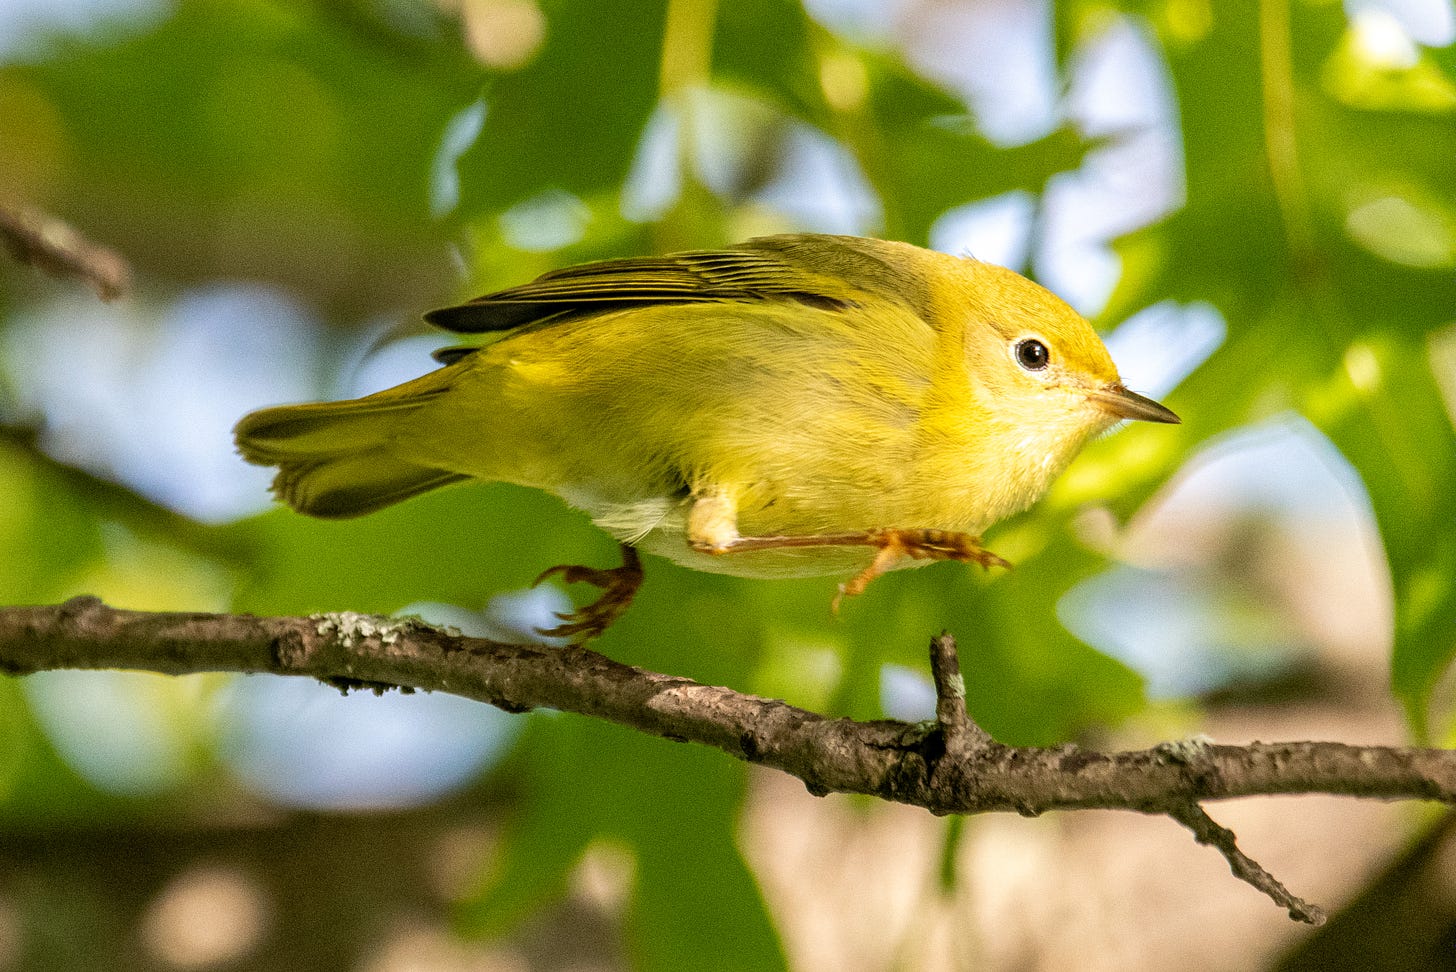 A yellow warbler running along top of a branch, neither foot touching the branch